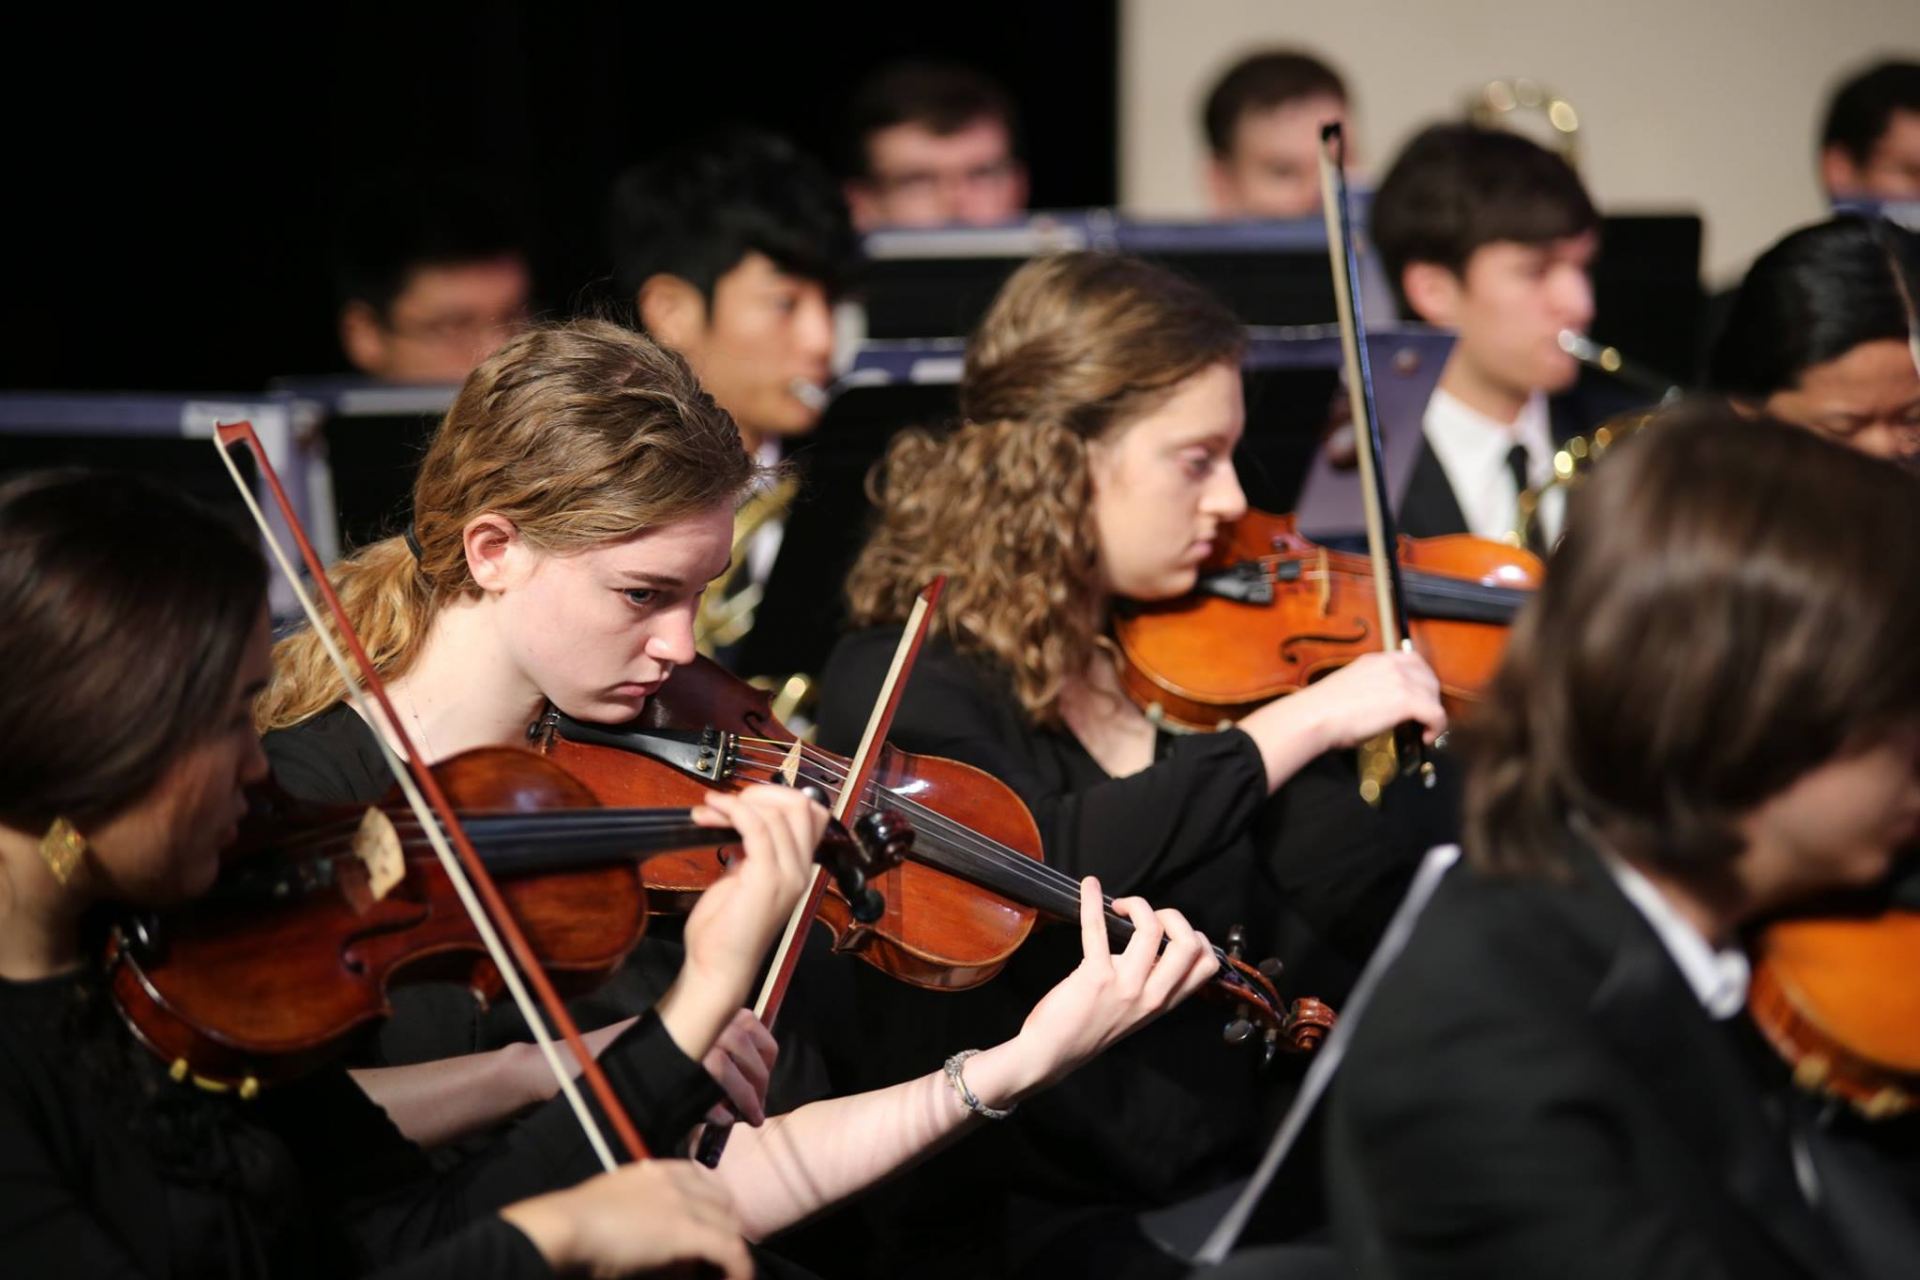 Violinists performing in the orchestra